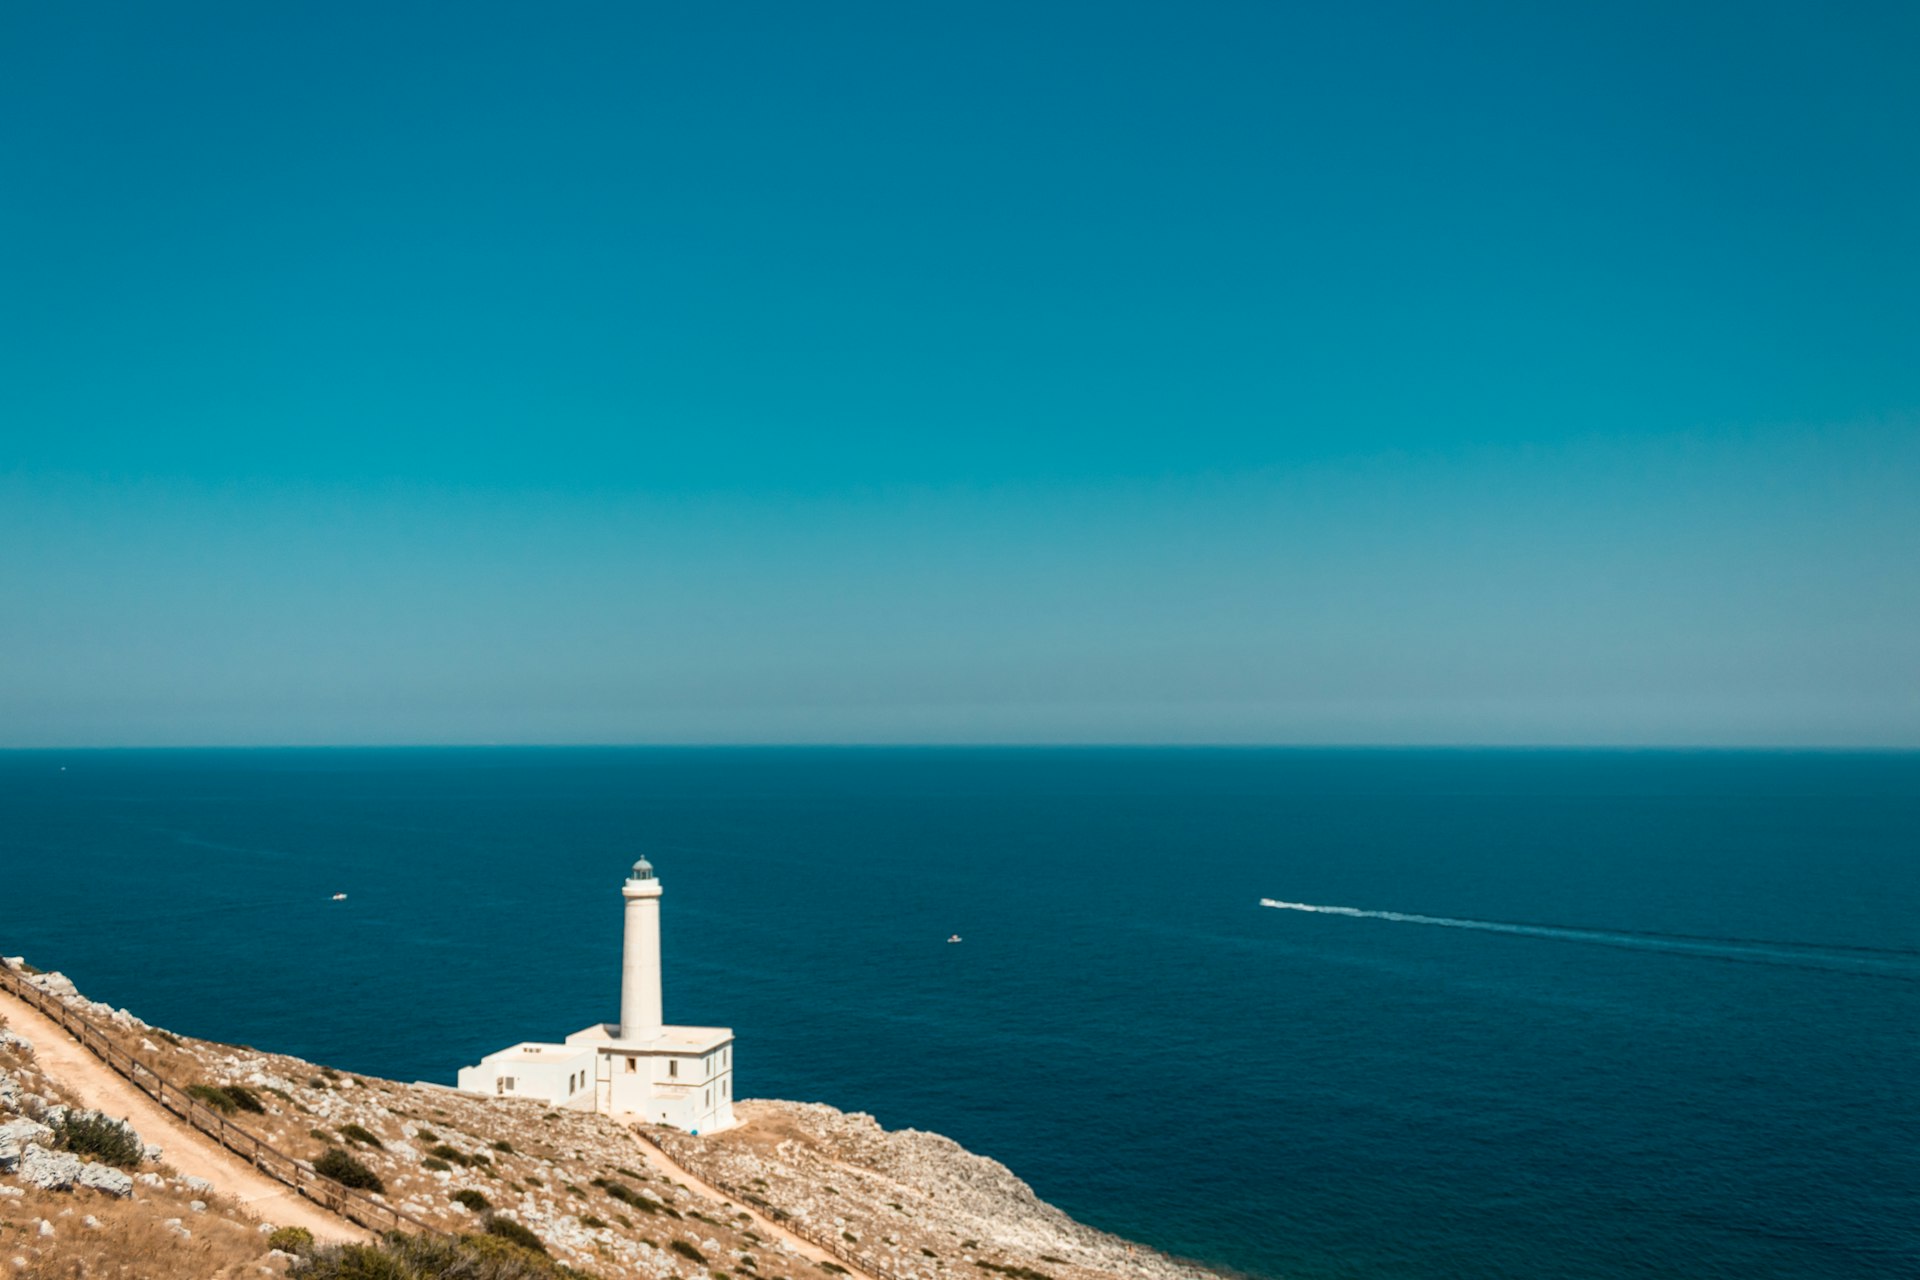 The easternmost lighthouse in Italy overlooking the stretch of the Otranto Channel, Puglia